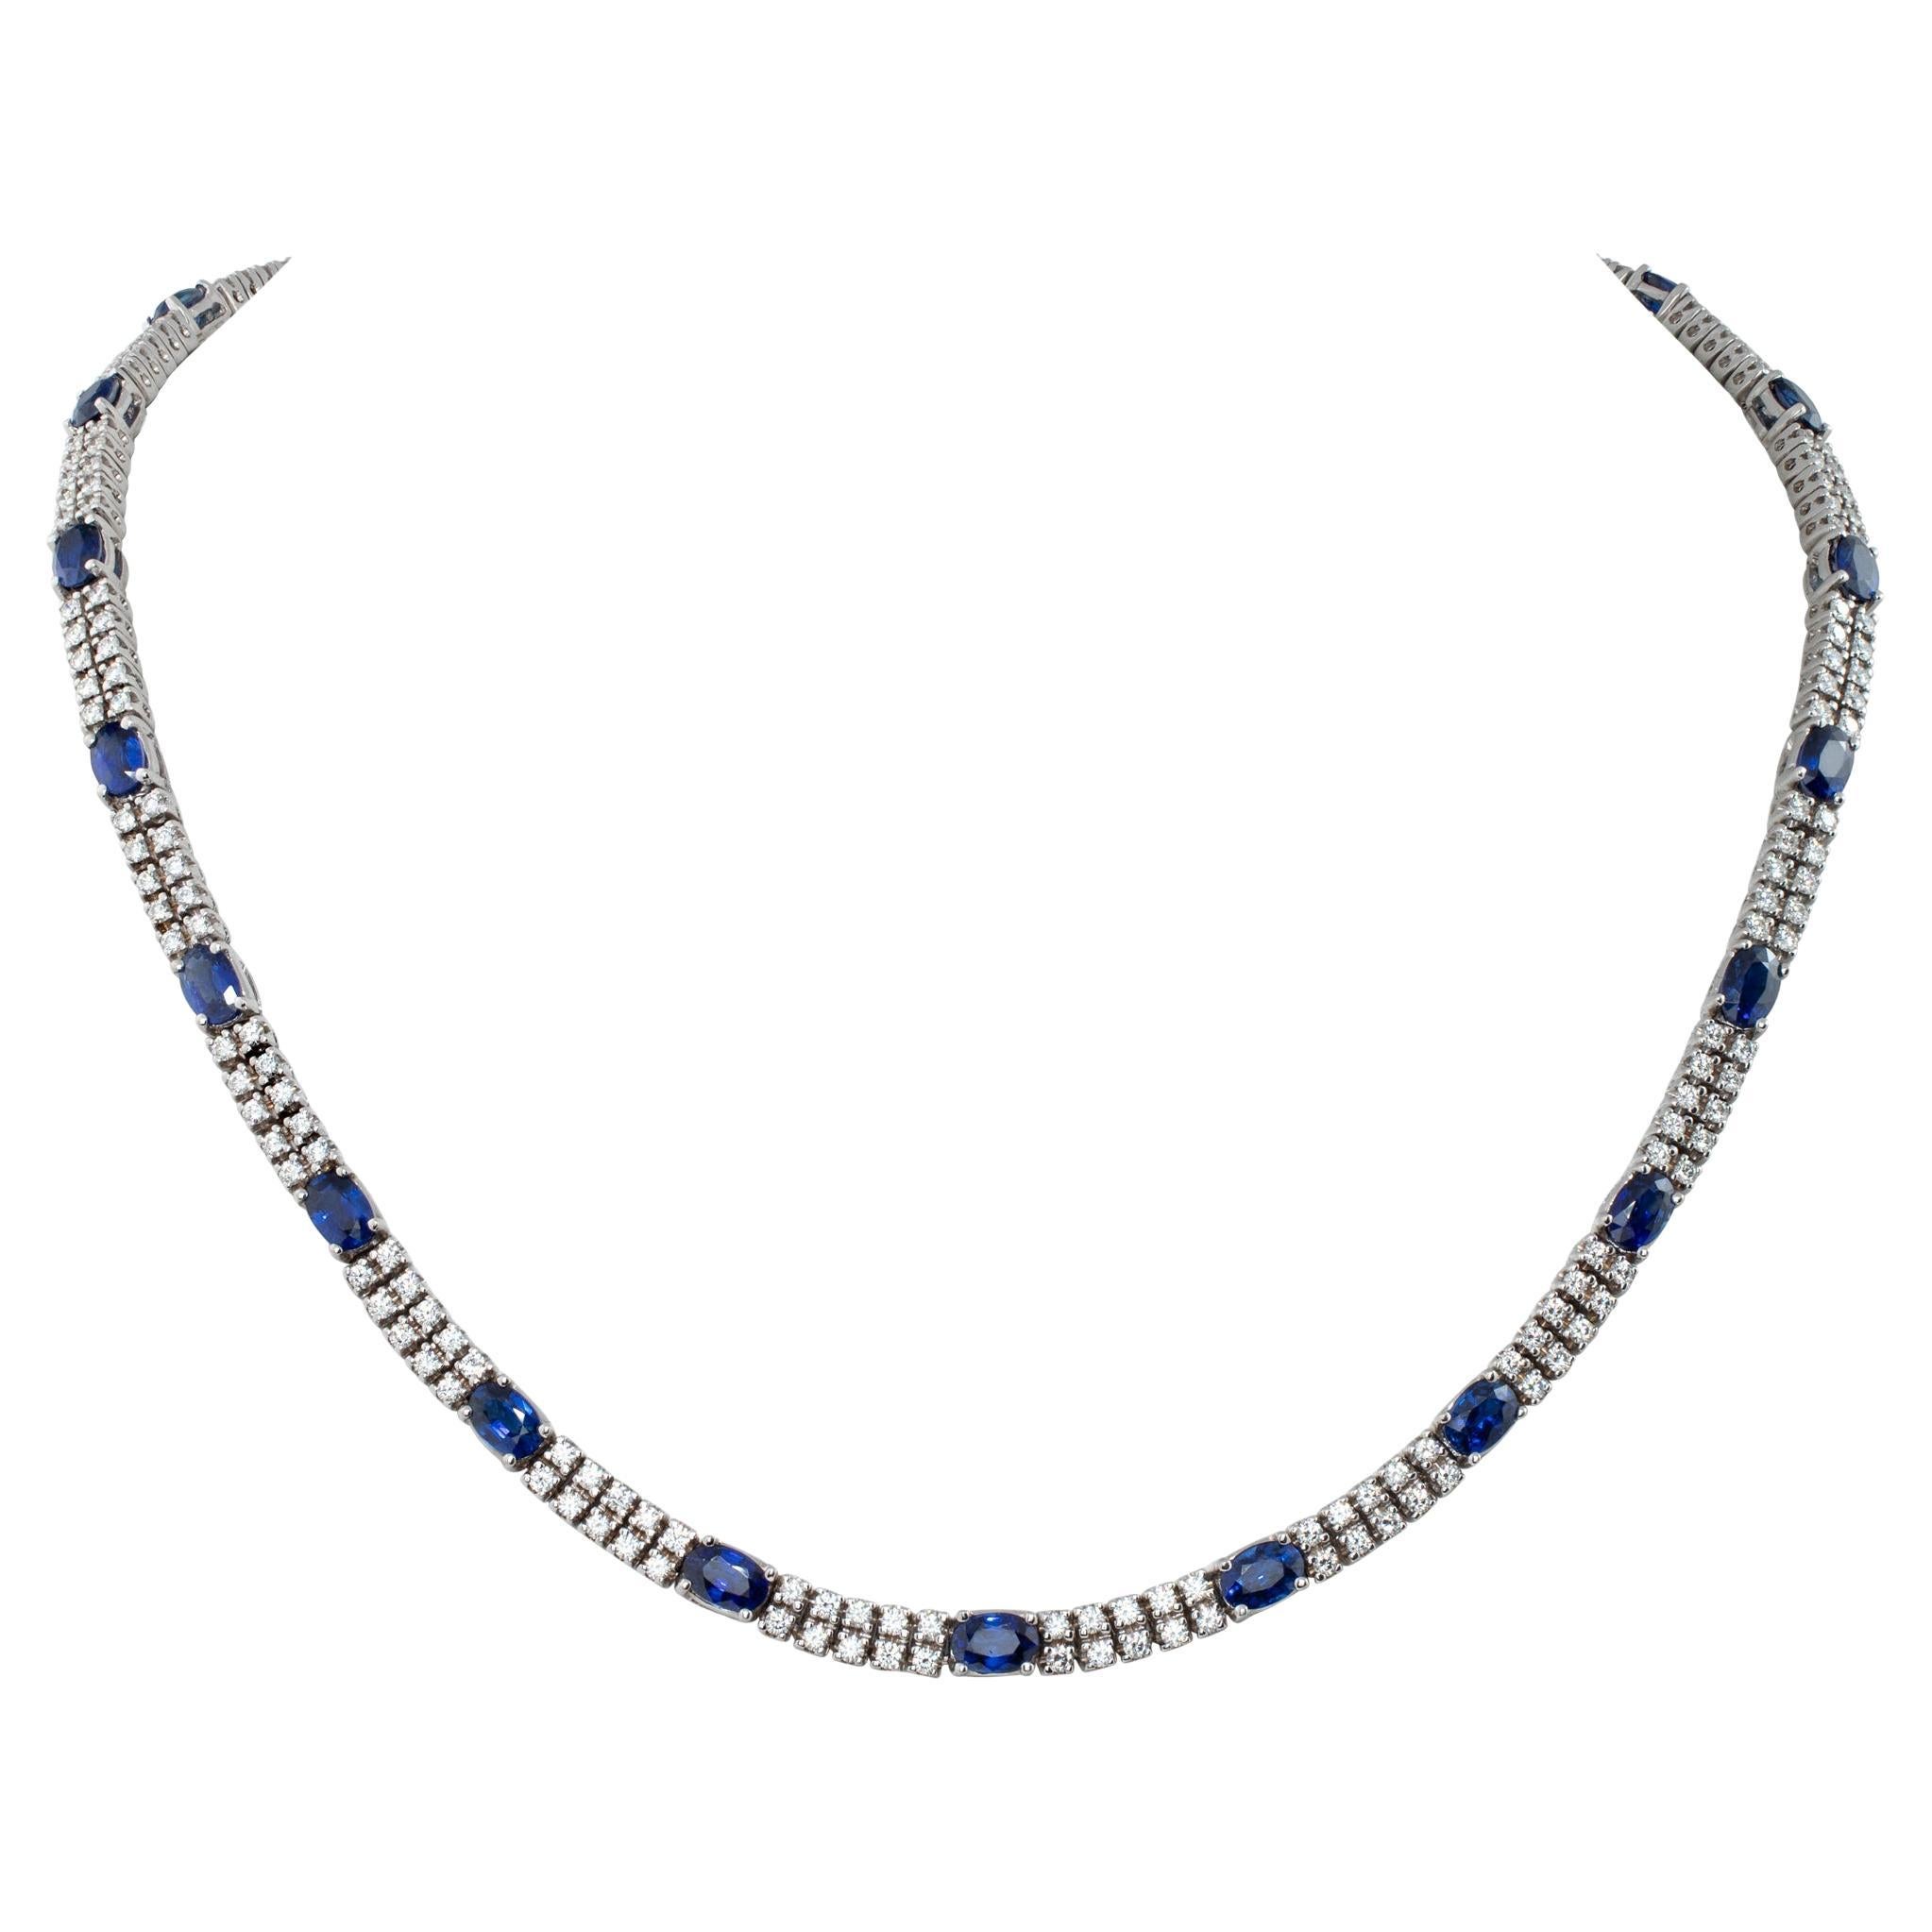 White gold double row tennis necklace with diamonds and sapphires